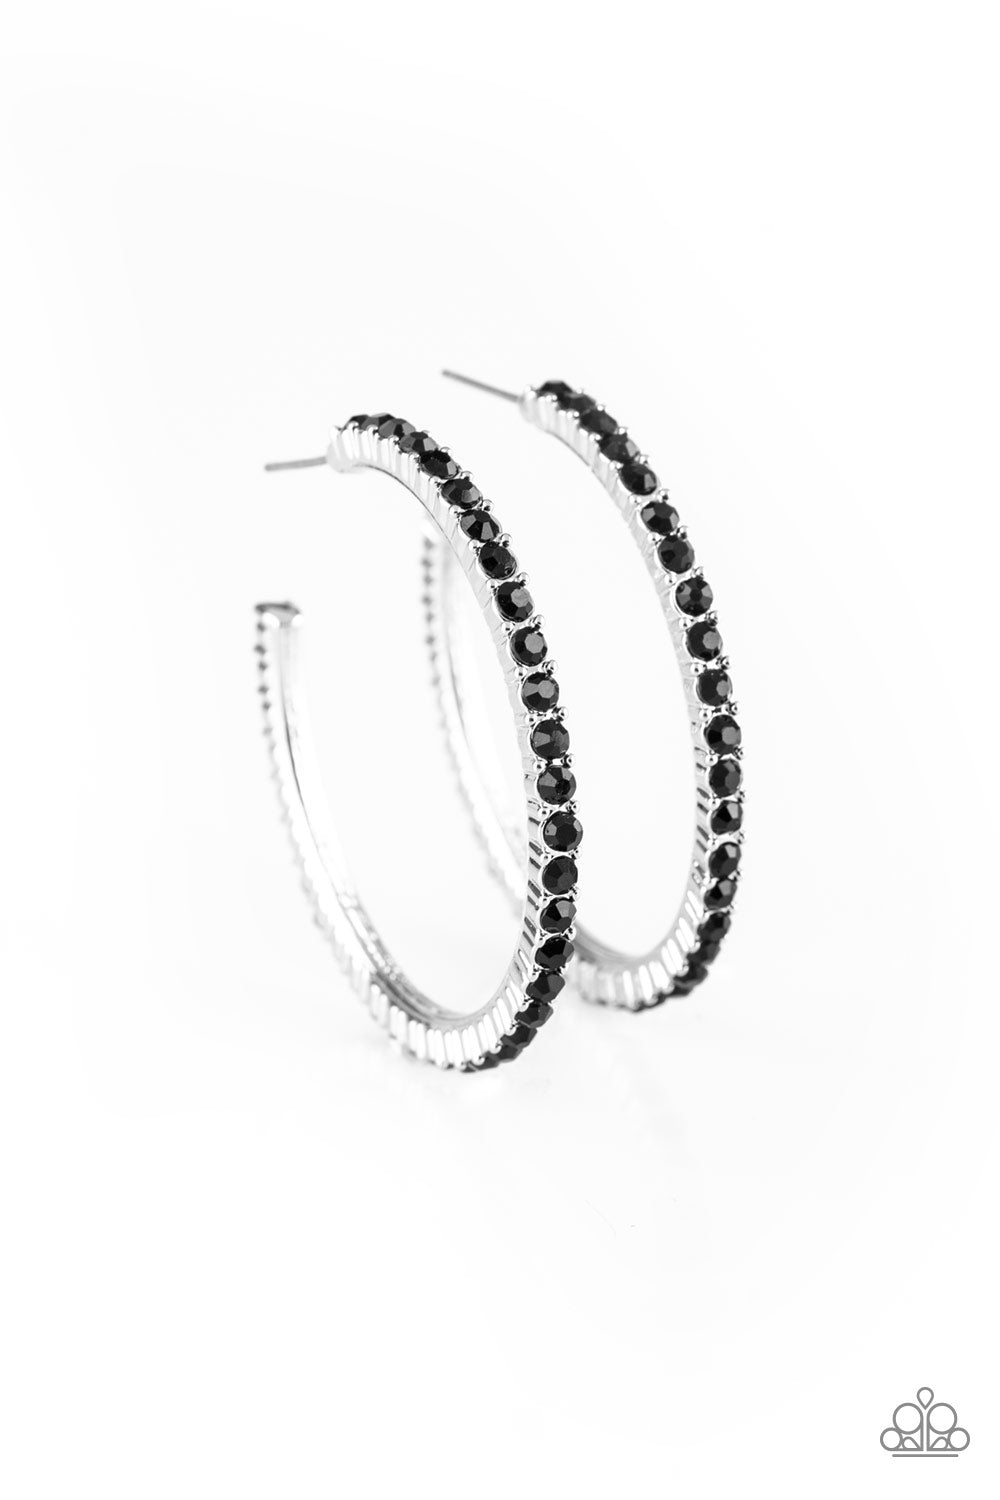 Encrusted in glassy black rhinestones, a textured silver hoop curls around the ear for a refined look. Earring attaches to a standard post fitting. Hoop measures 1 3/4